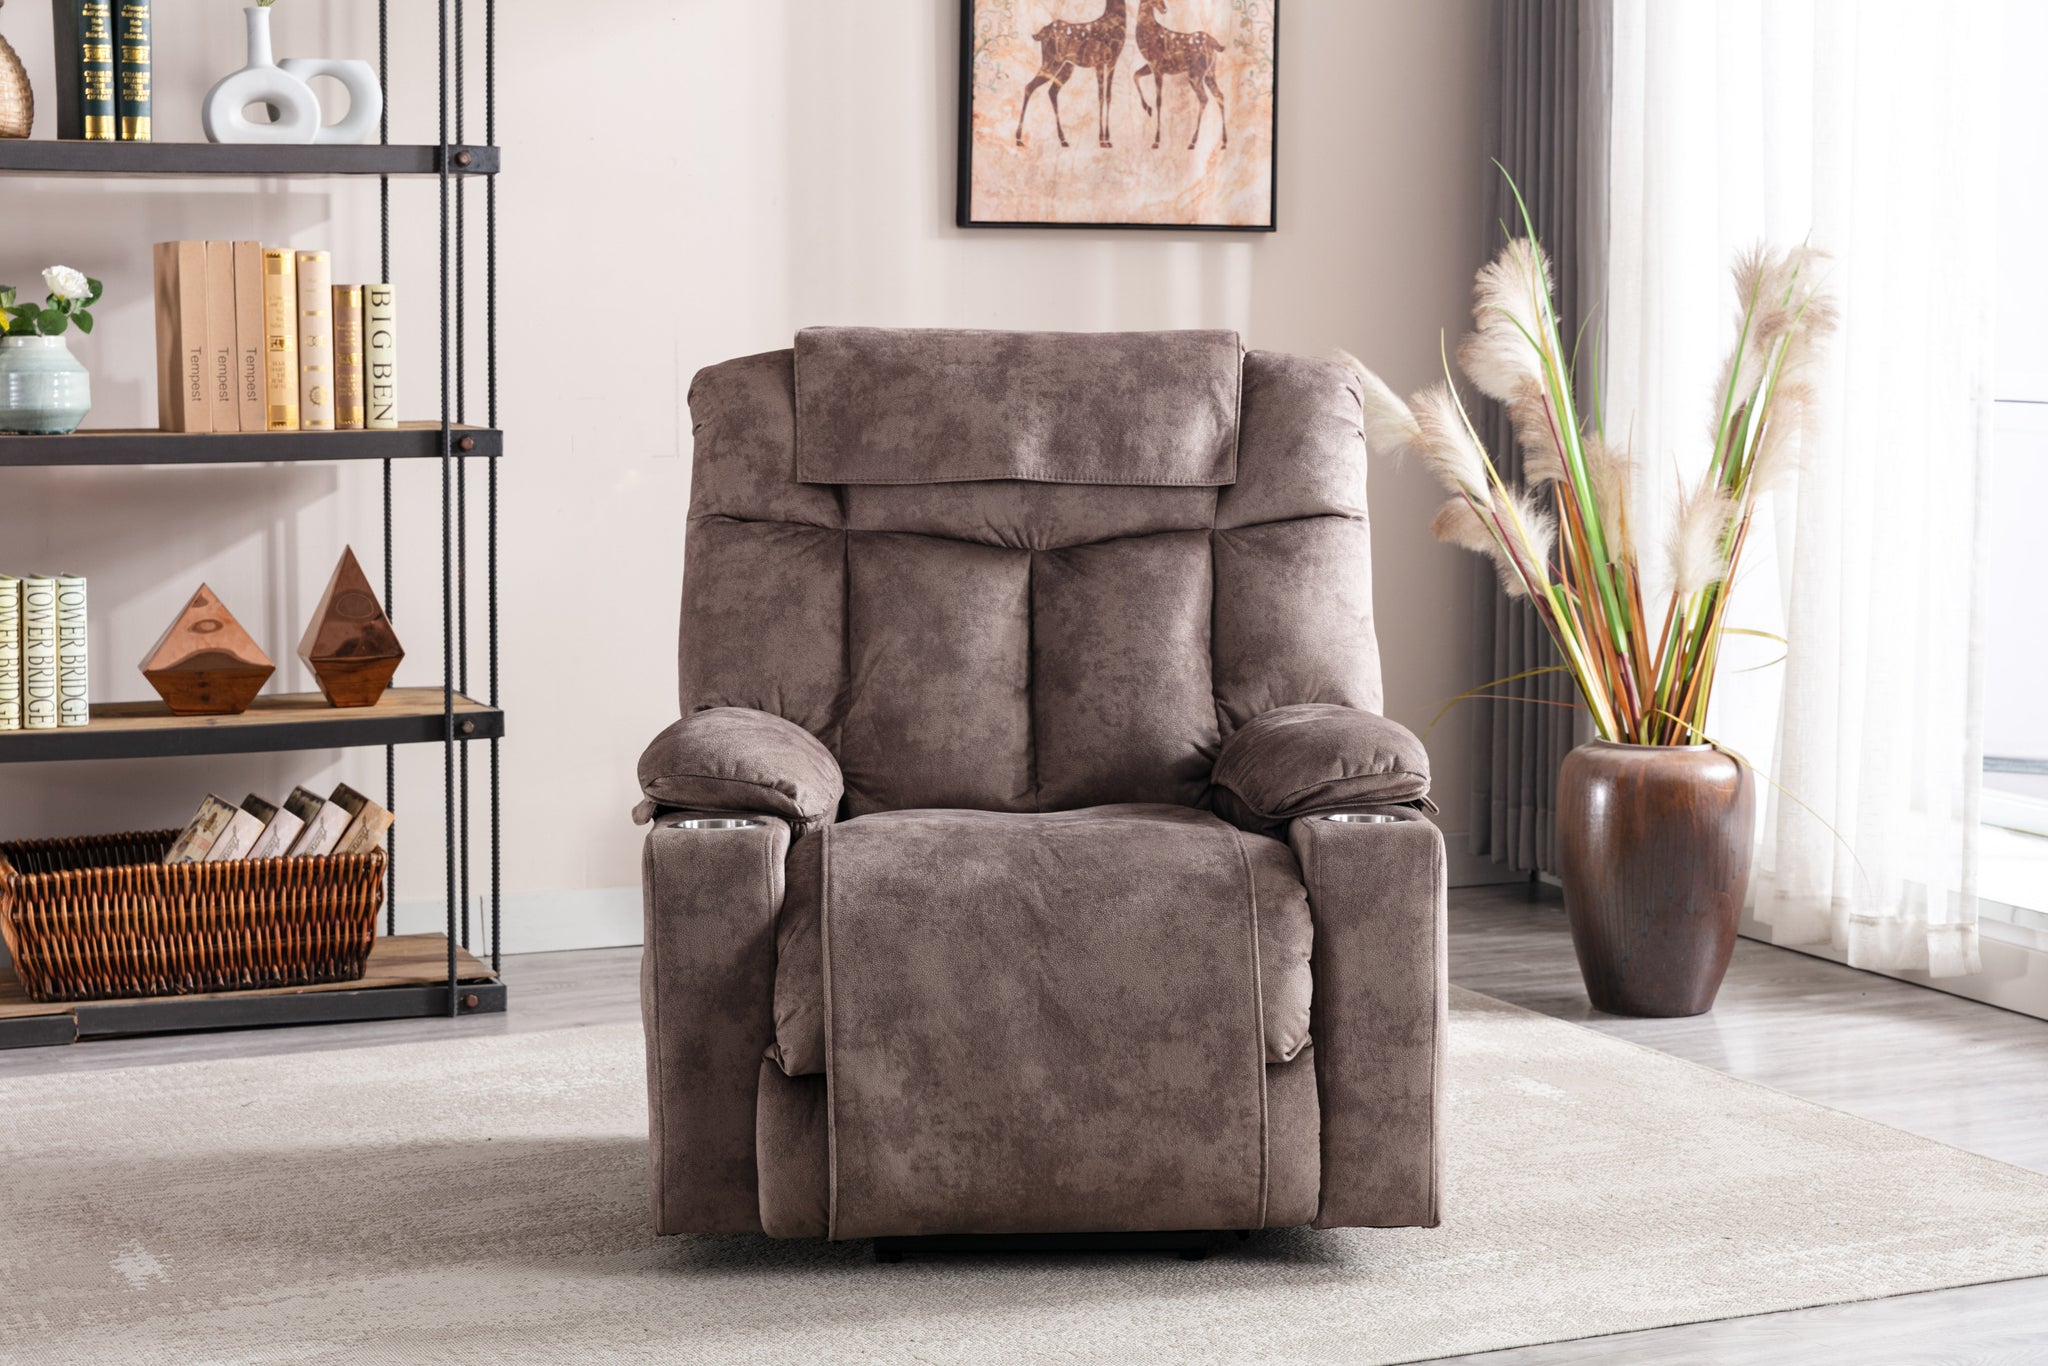 Power Lift Recliner Chair For Elderly, 3 Positions